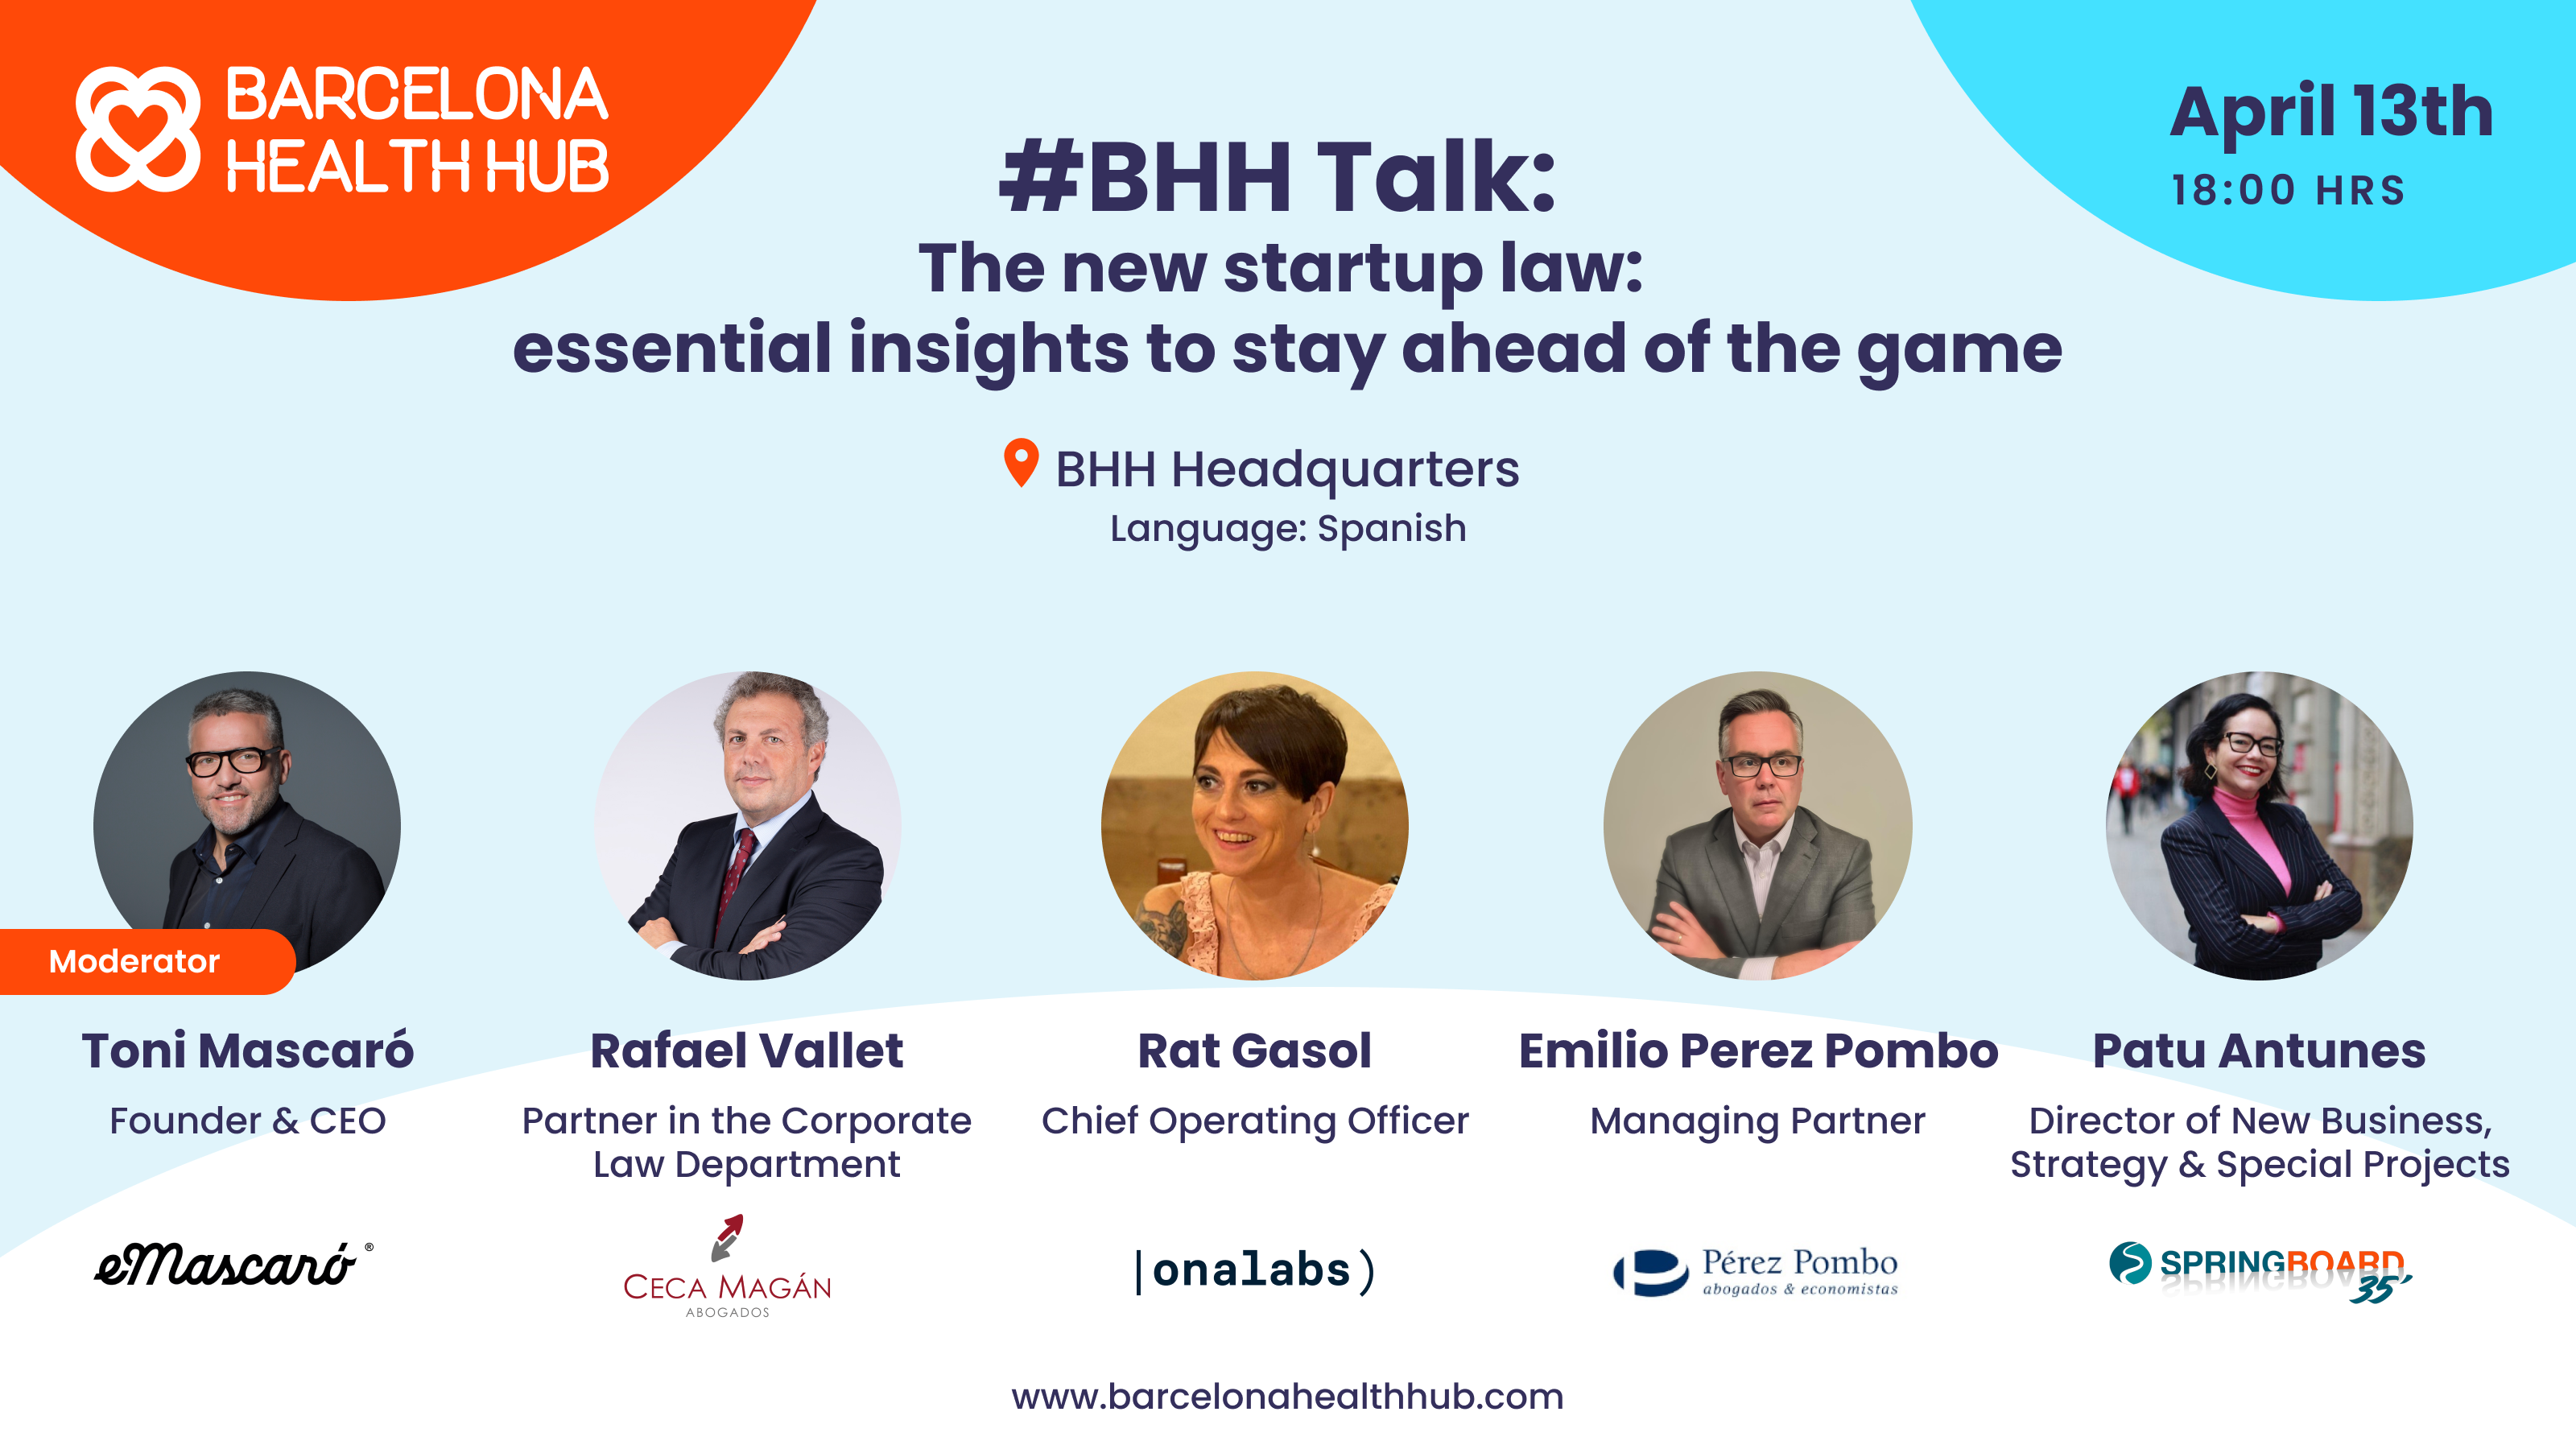 #BHHTalk on April 13th - The new startup law: essential insights to stay ahead of the game